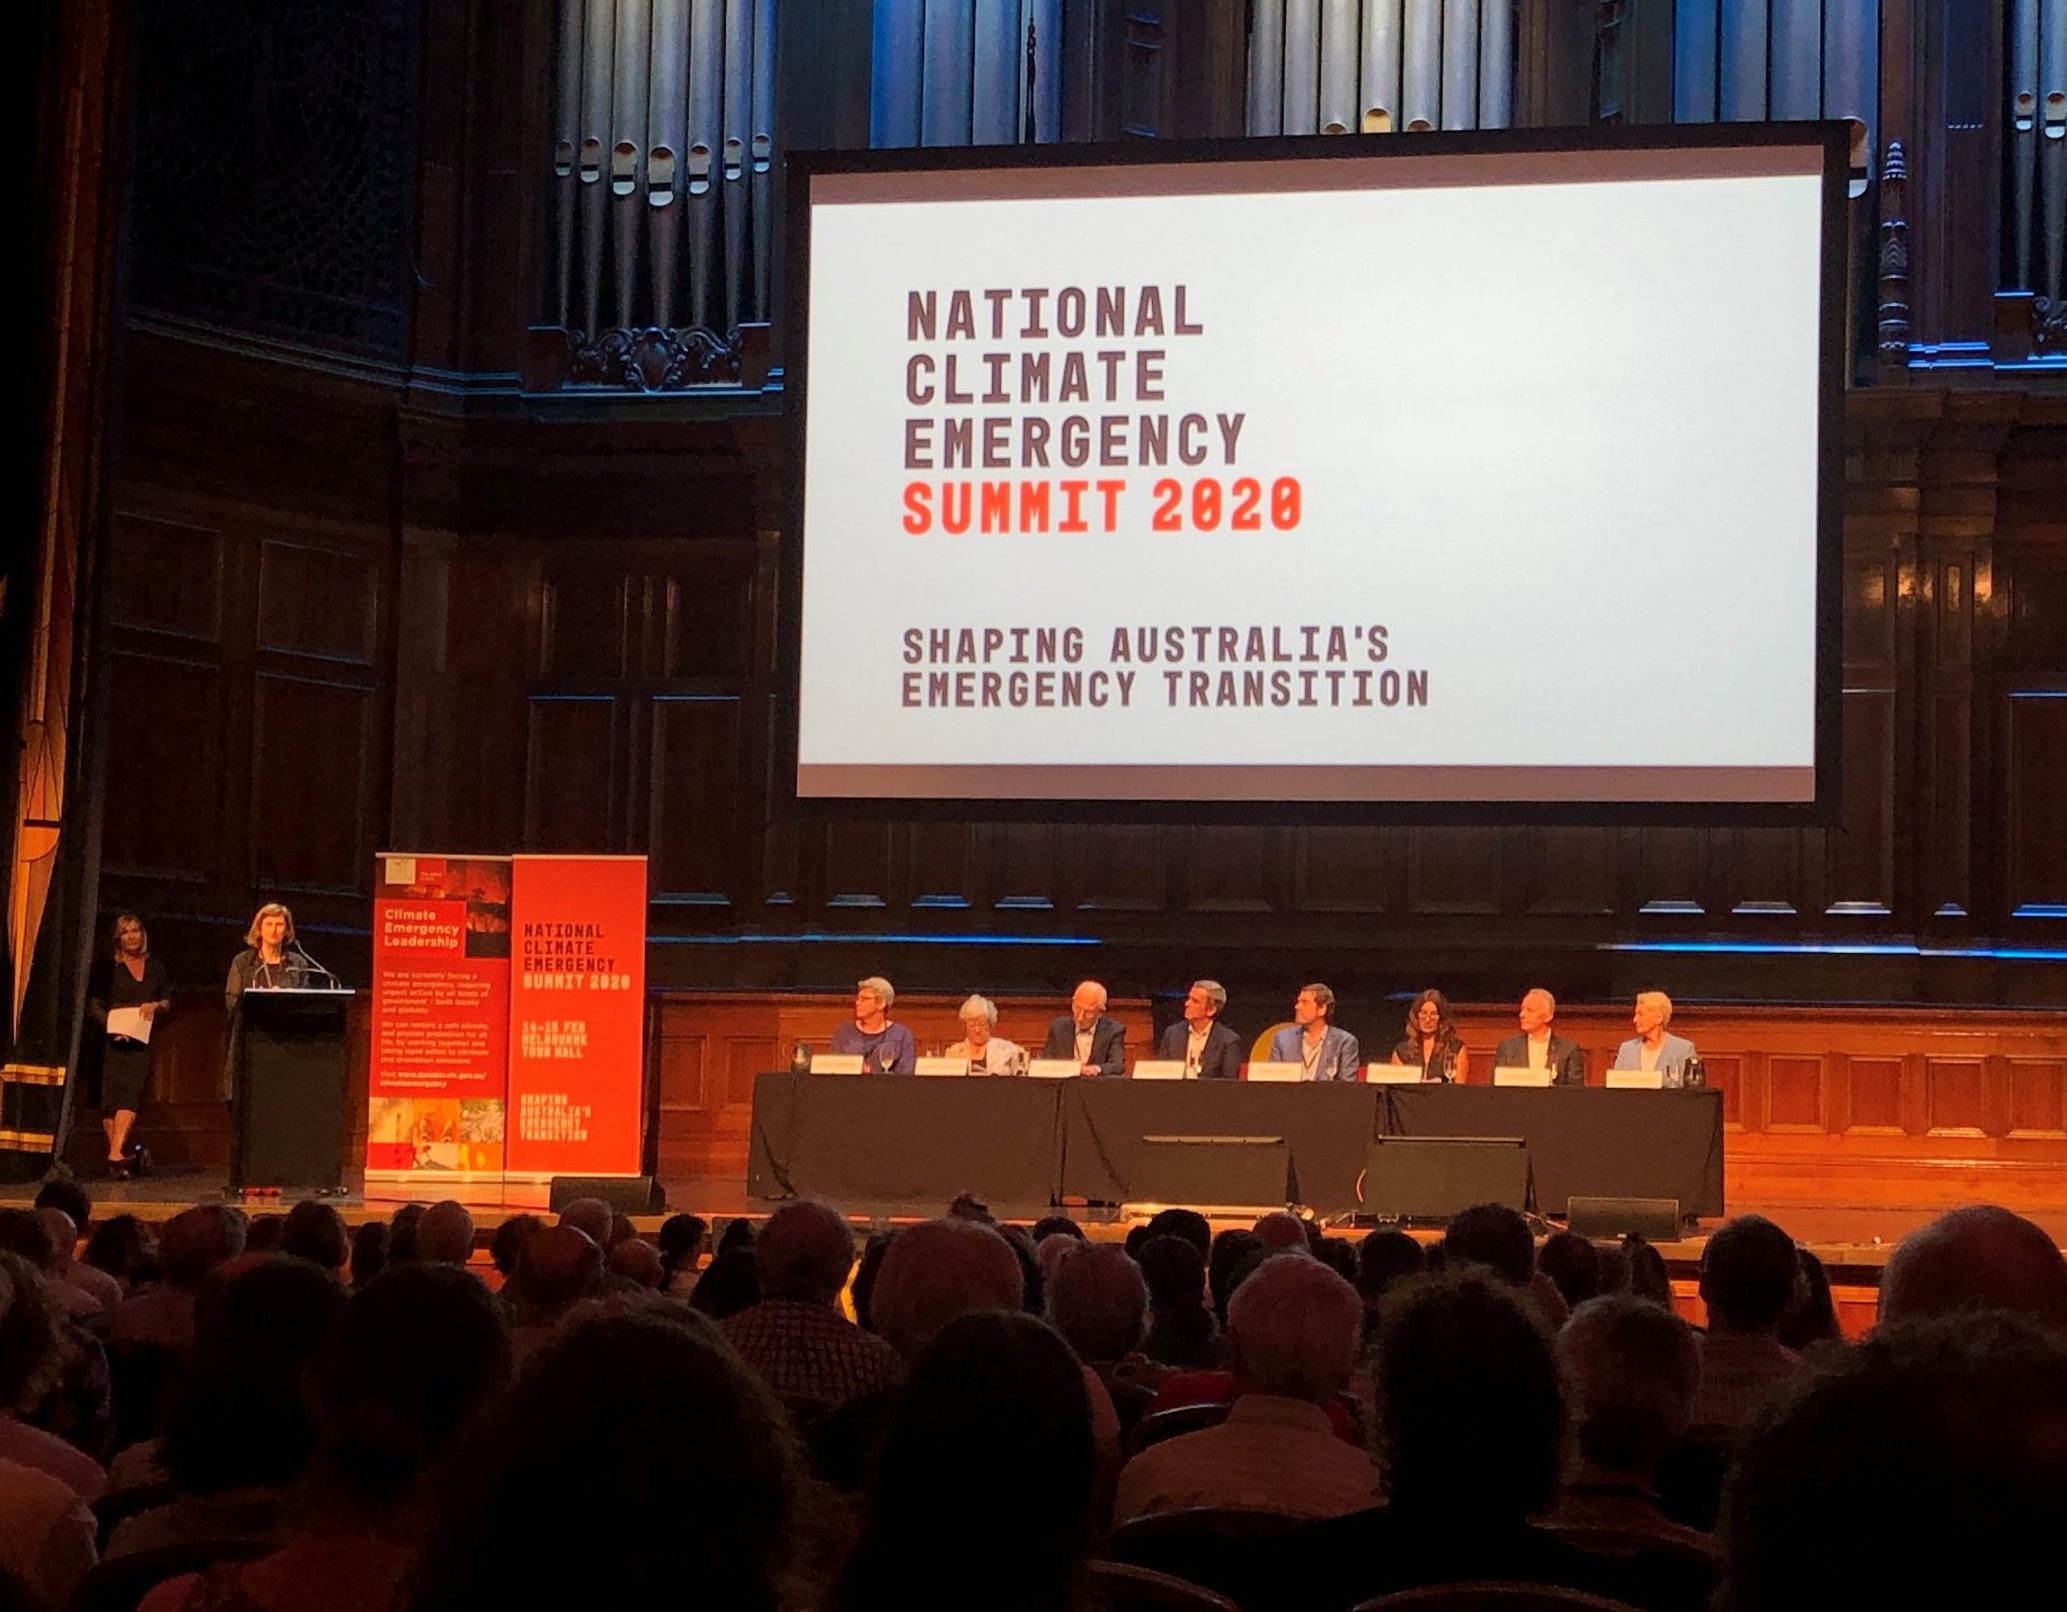 Attending the National Climate Emergency Summit